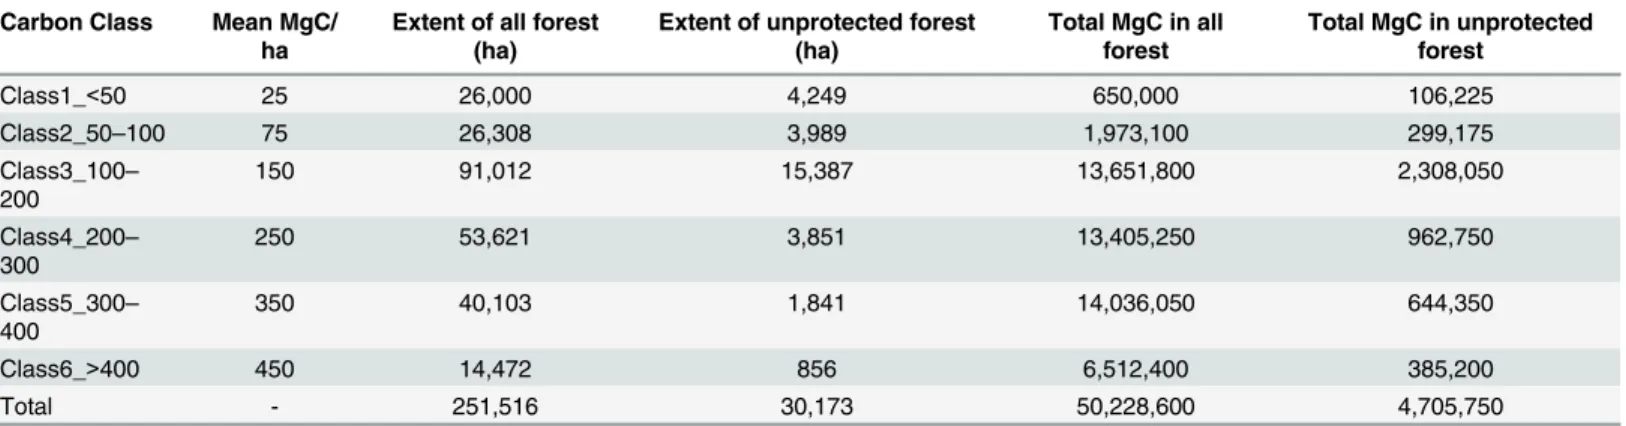 Table 2. Carbon classes with mean carbon value (metric tons of carbon per ha) per class used to calculate carbon stock (MgC); total forest and unprotected forest extents (ha) with predicted carbon stock (MgC).